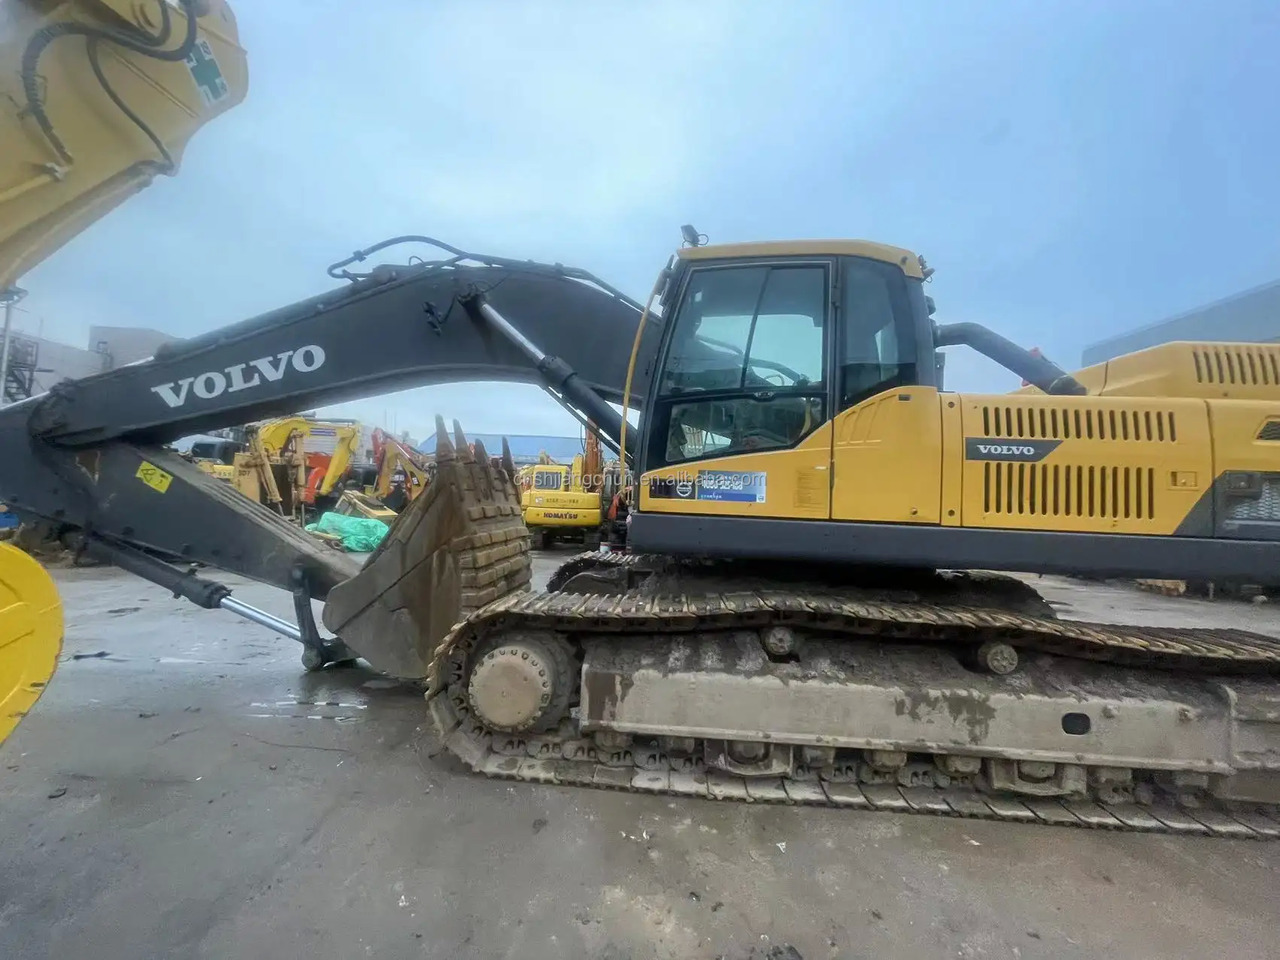 Kettenbagger New arrival second hand  hot selling Excavator construction machinery parts used excavator used  Volvo EC480D  in stock for sale: das Bild 3